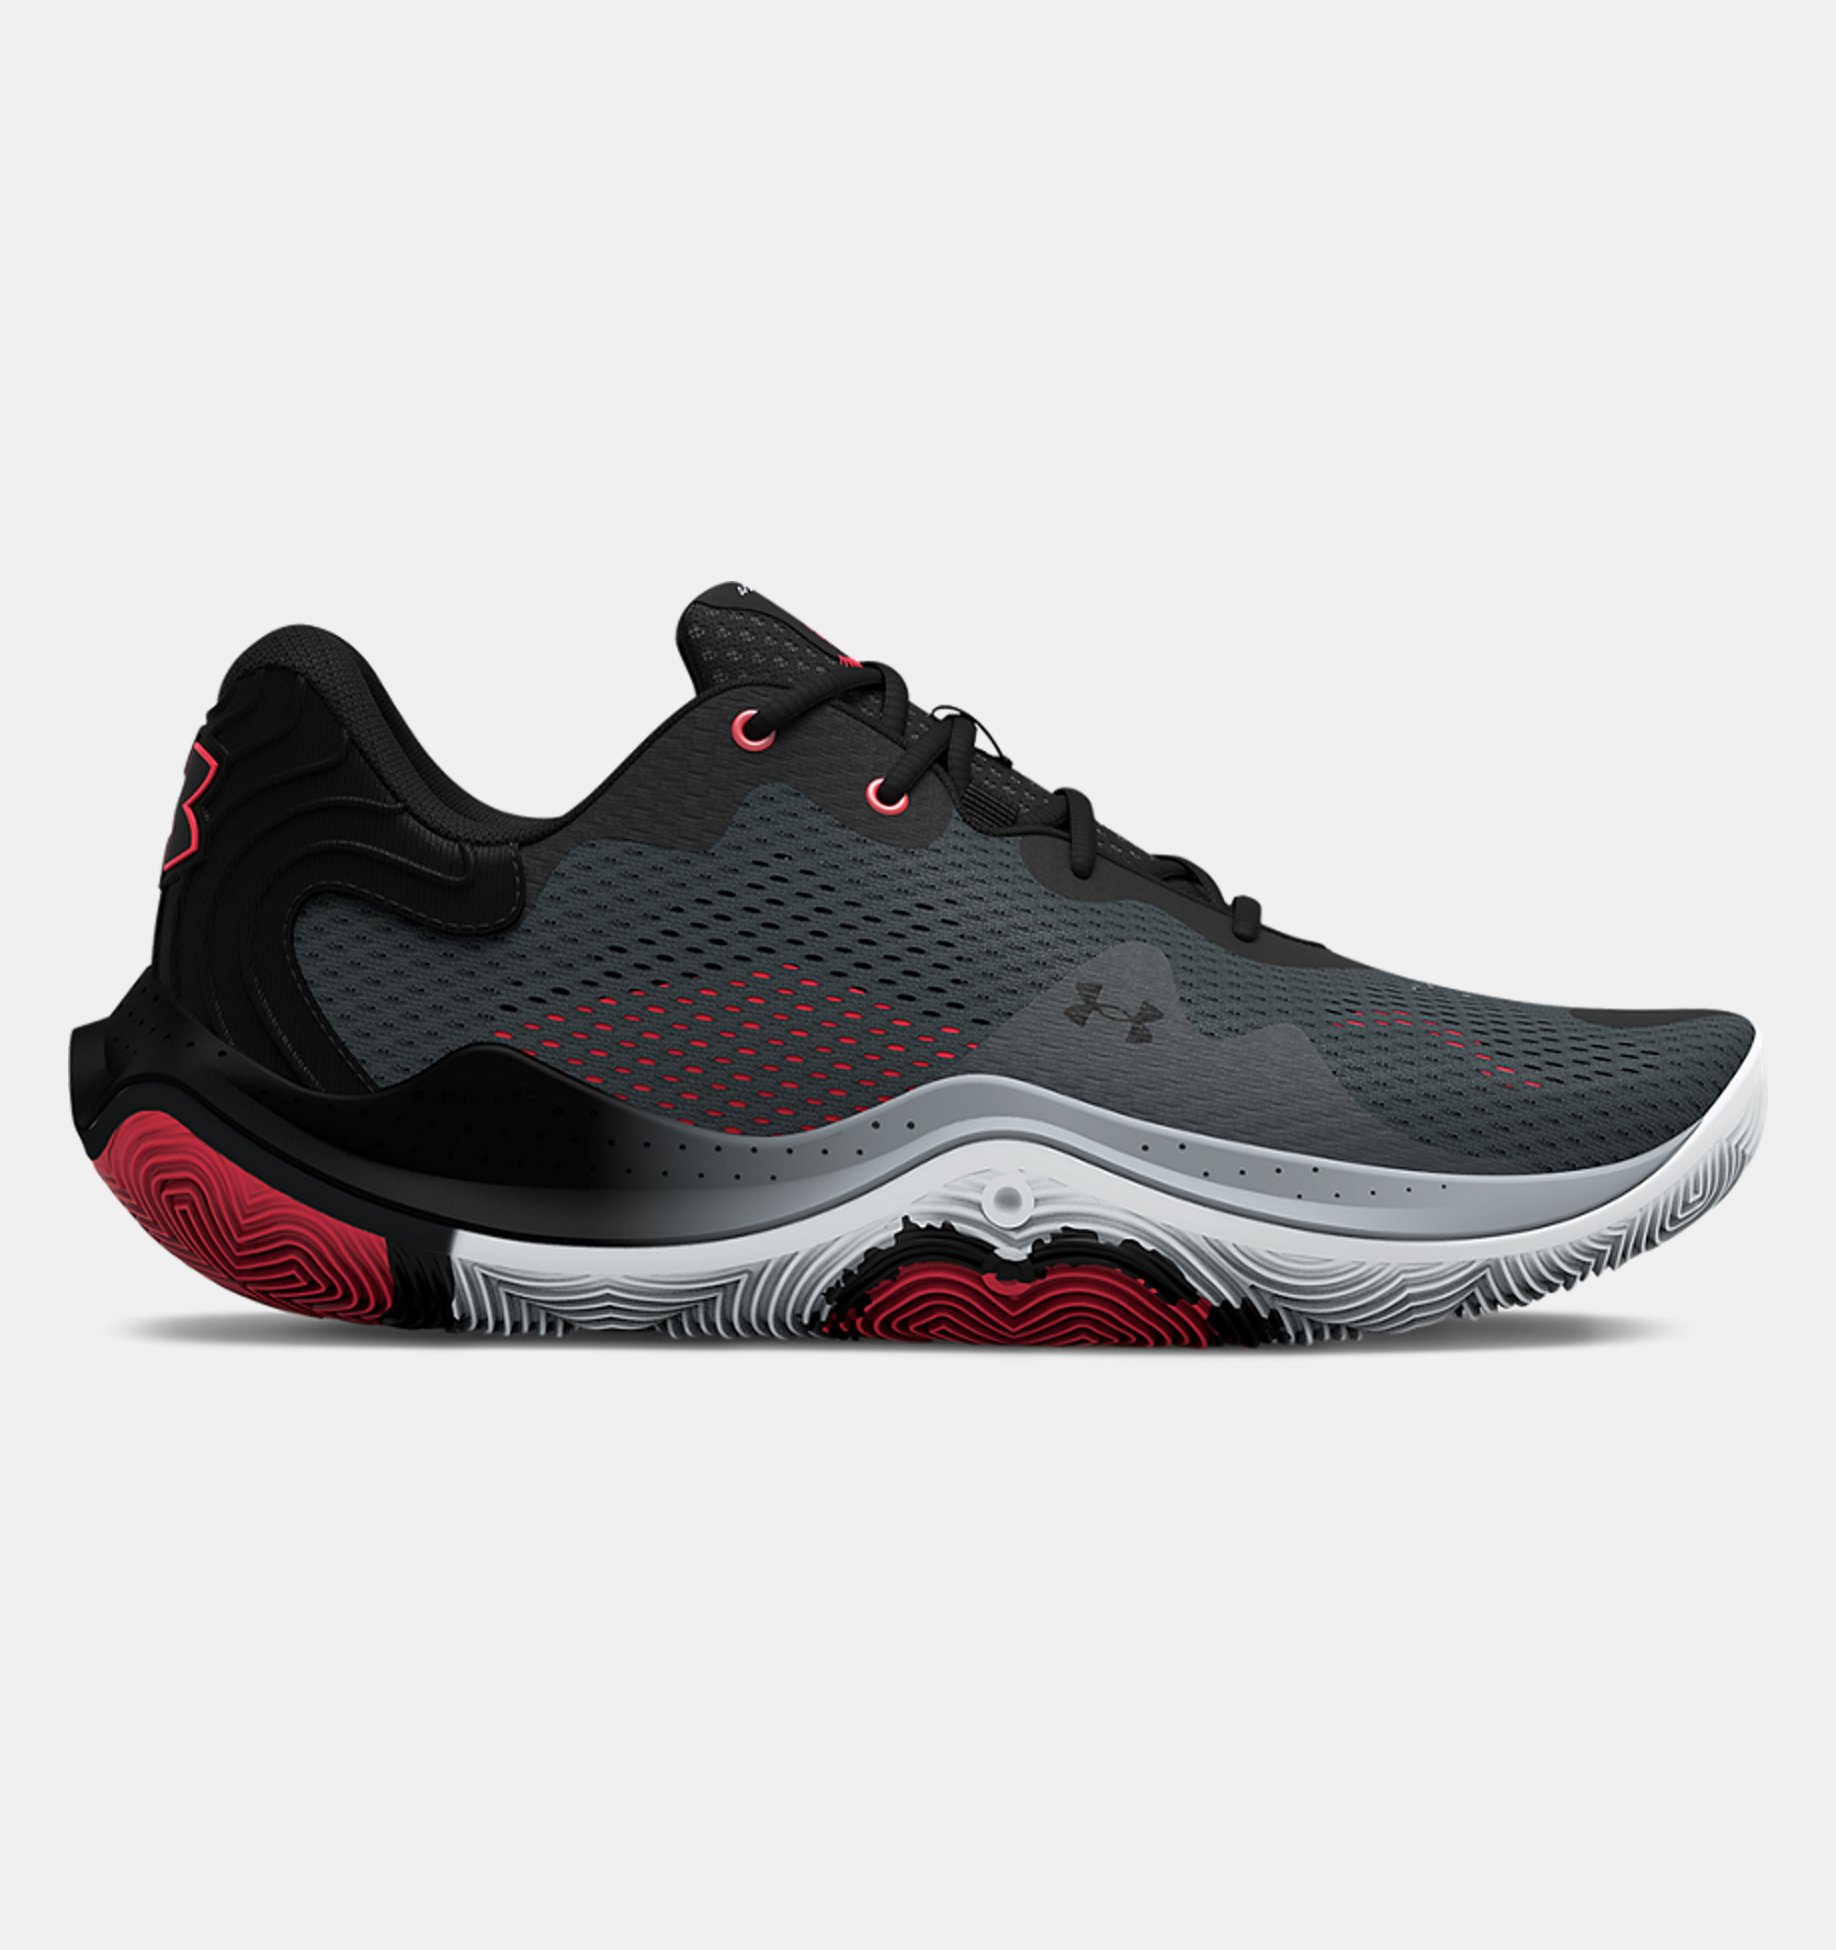 FREE SHIPPING! BRAND-NEW! Under Armour Men's Spawn Low Basketball Shoe 